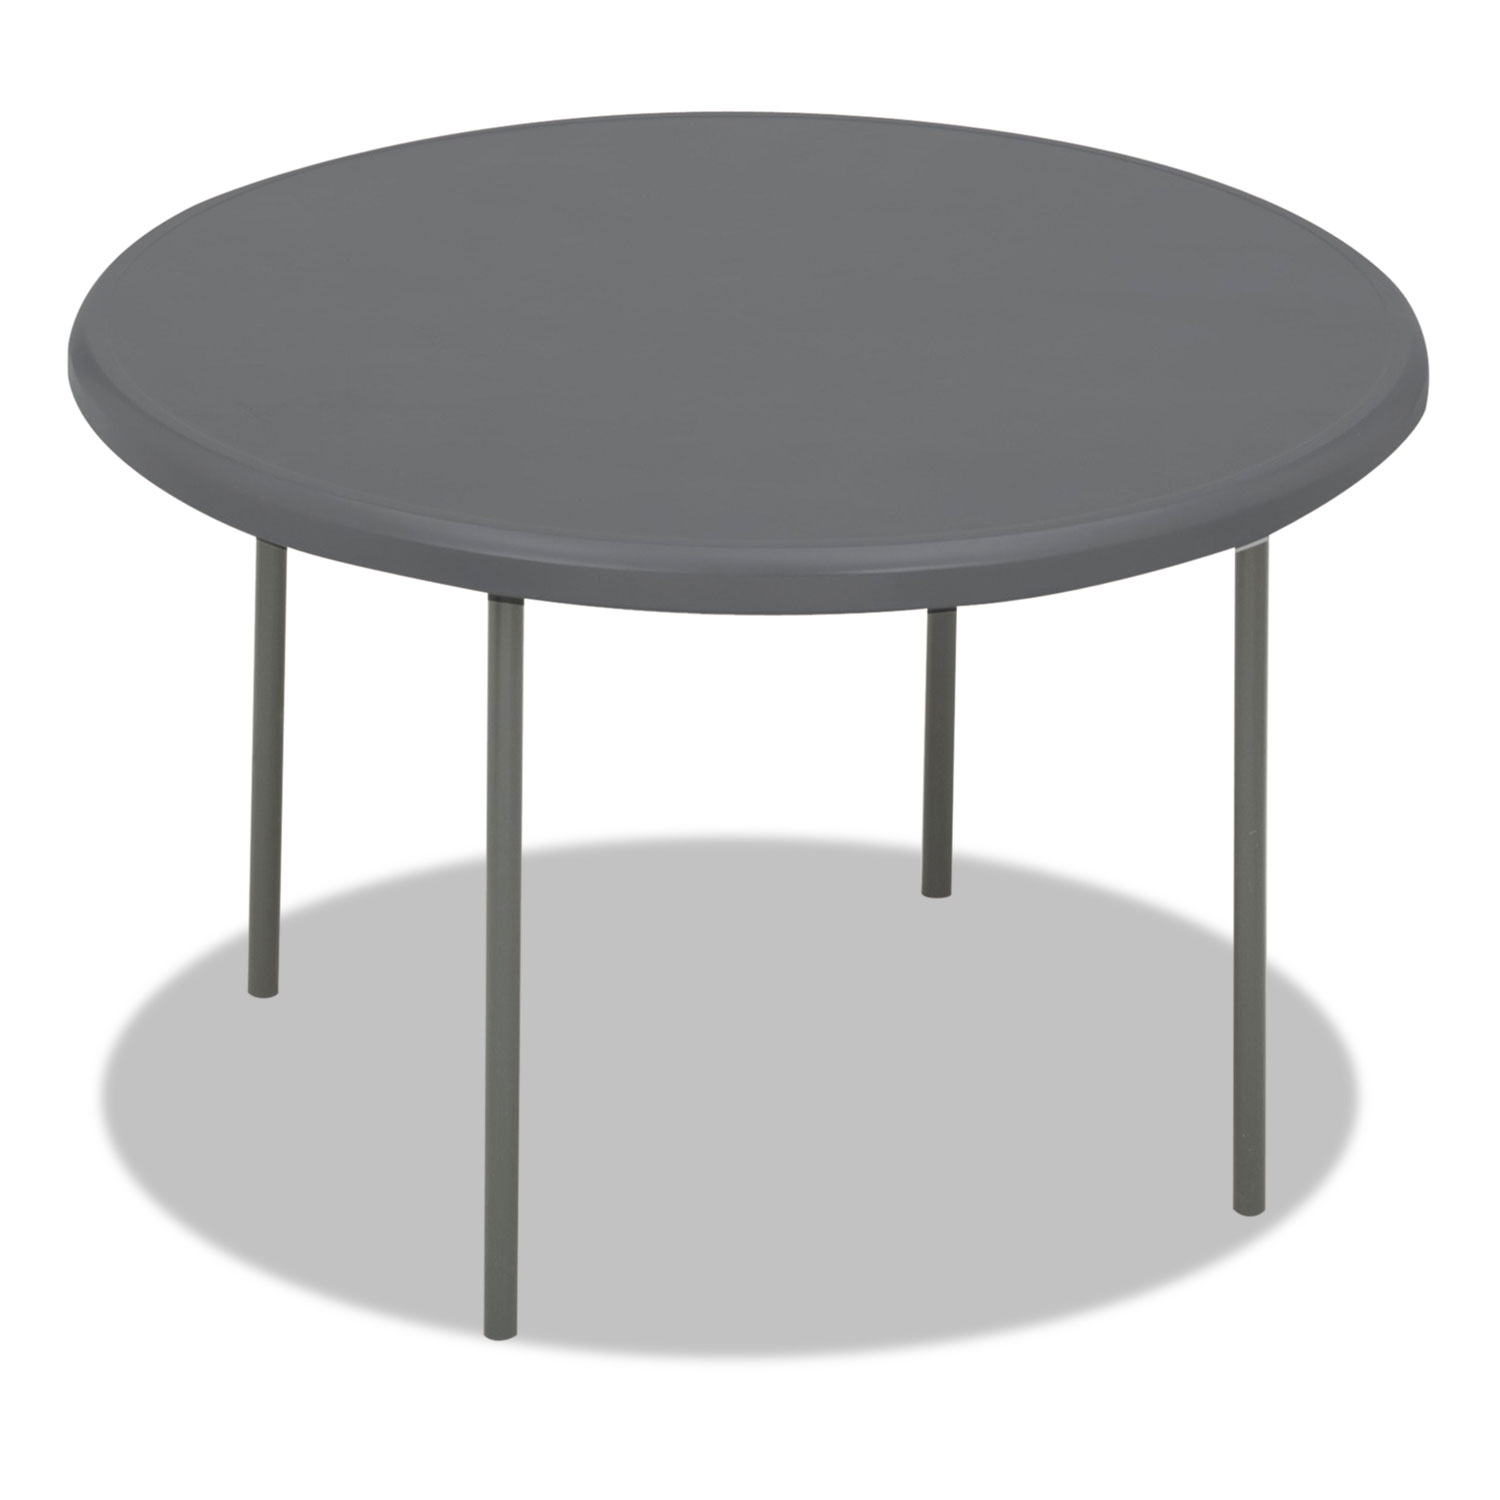  Iceberg 65247 IndestrucTables Too 1200 Series Resin Folding Table, 48 dia x 29h, Charcoal (ICE65247) 